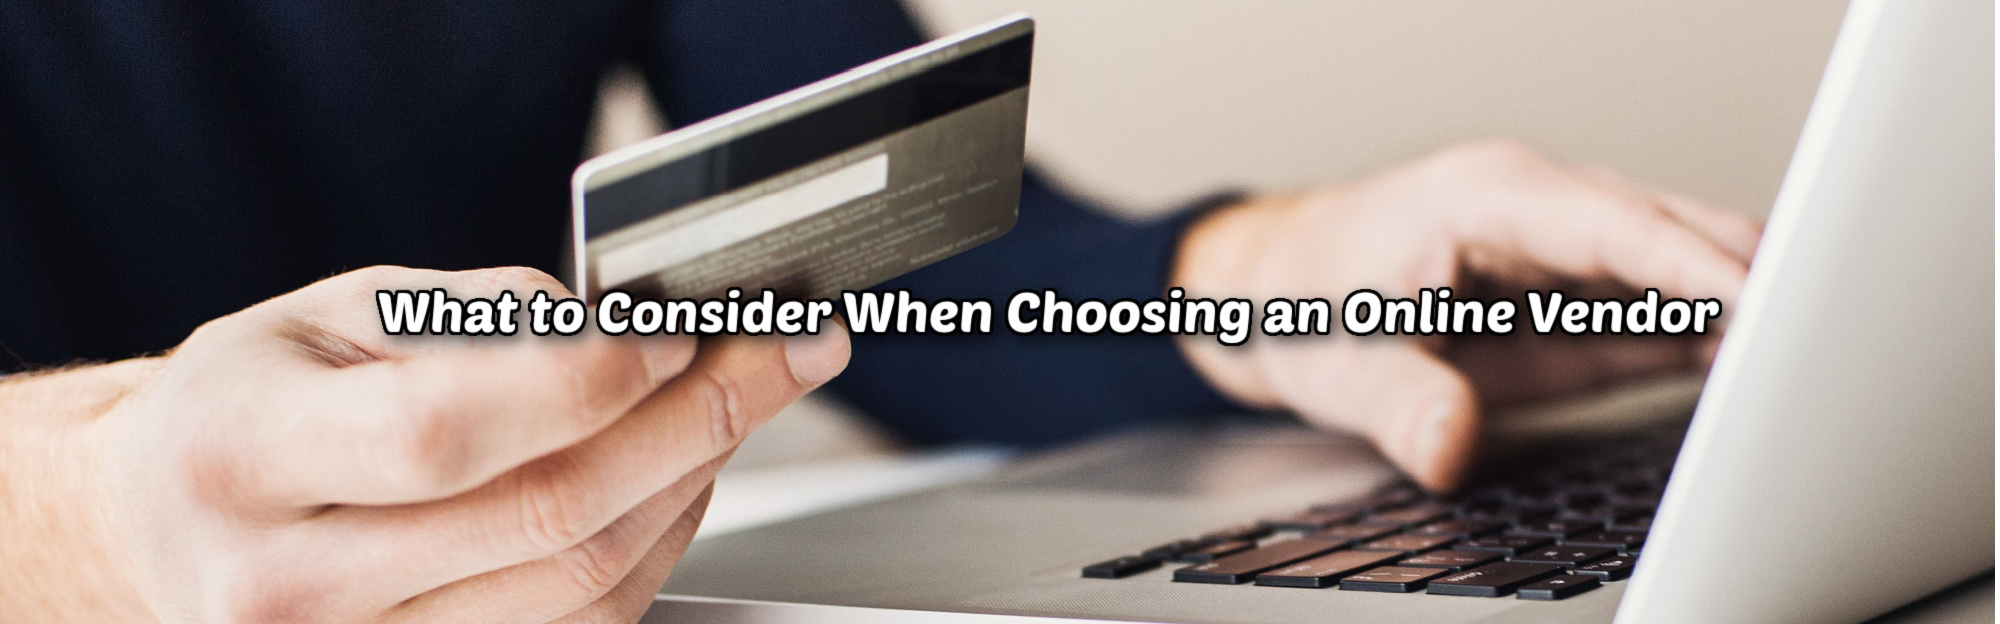 image of what to consider when choosing an online vendor